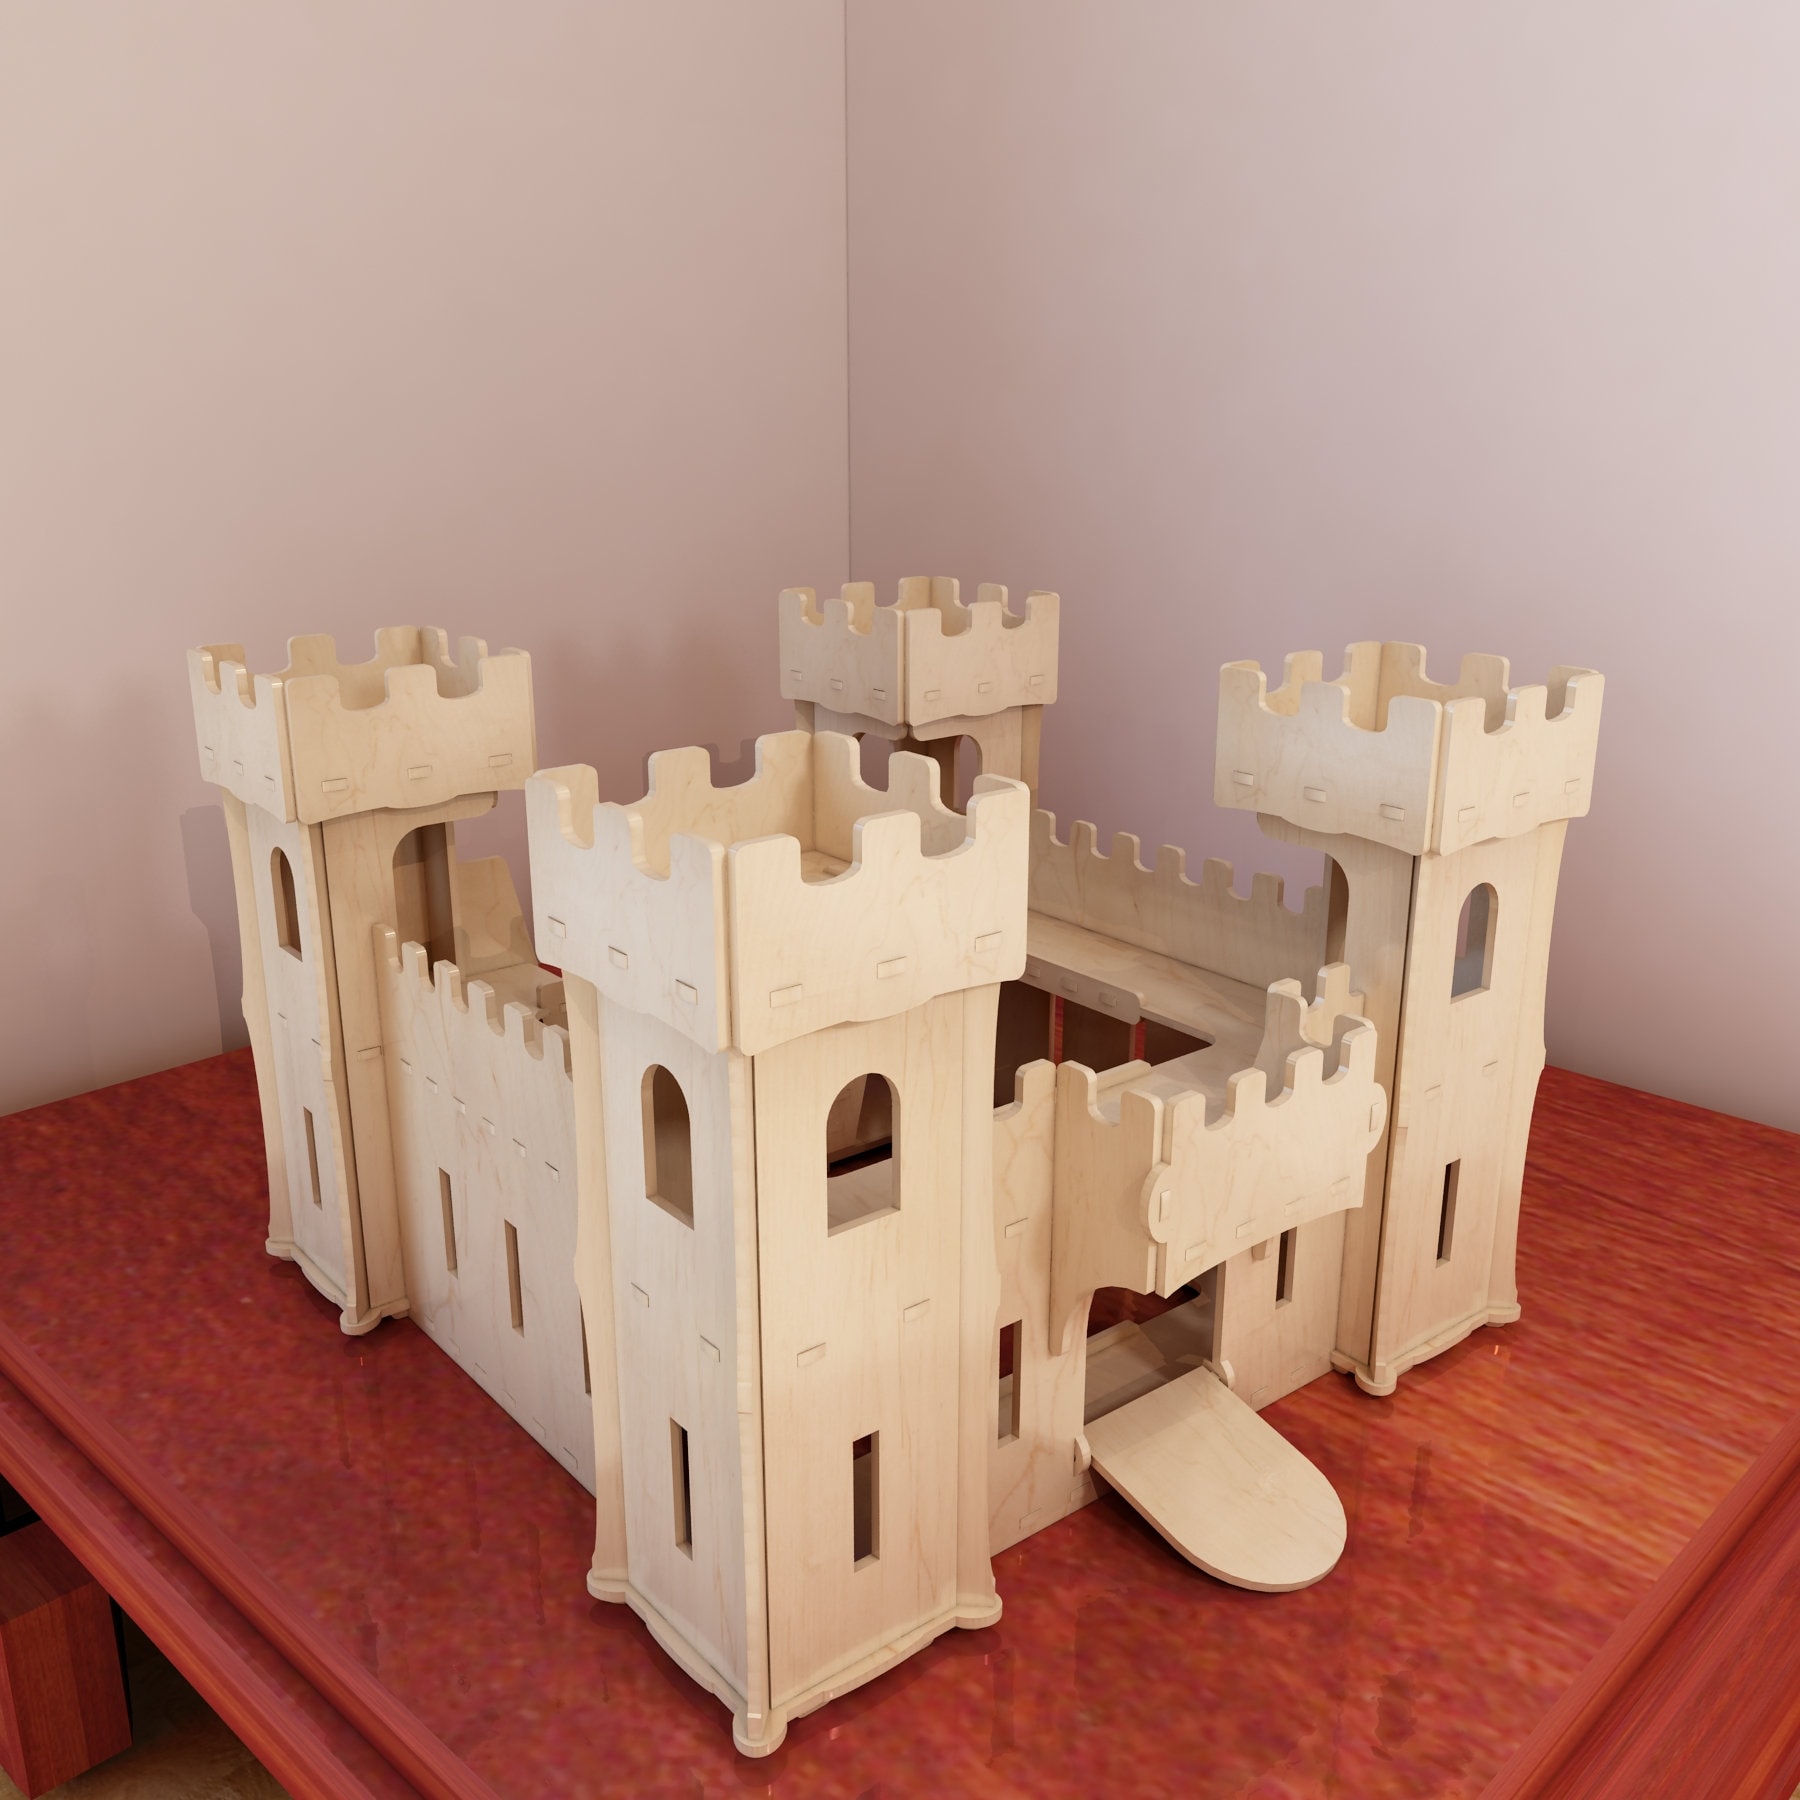 Beautiful wooden Castle toy plans. Pattern vector model for